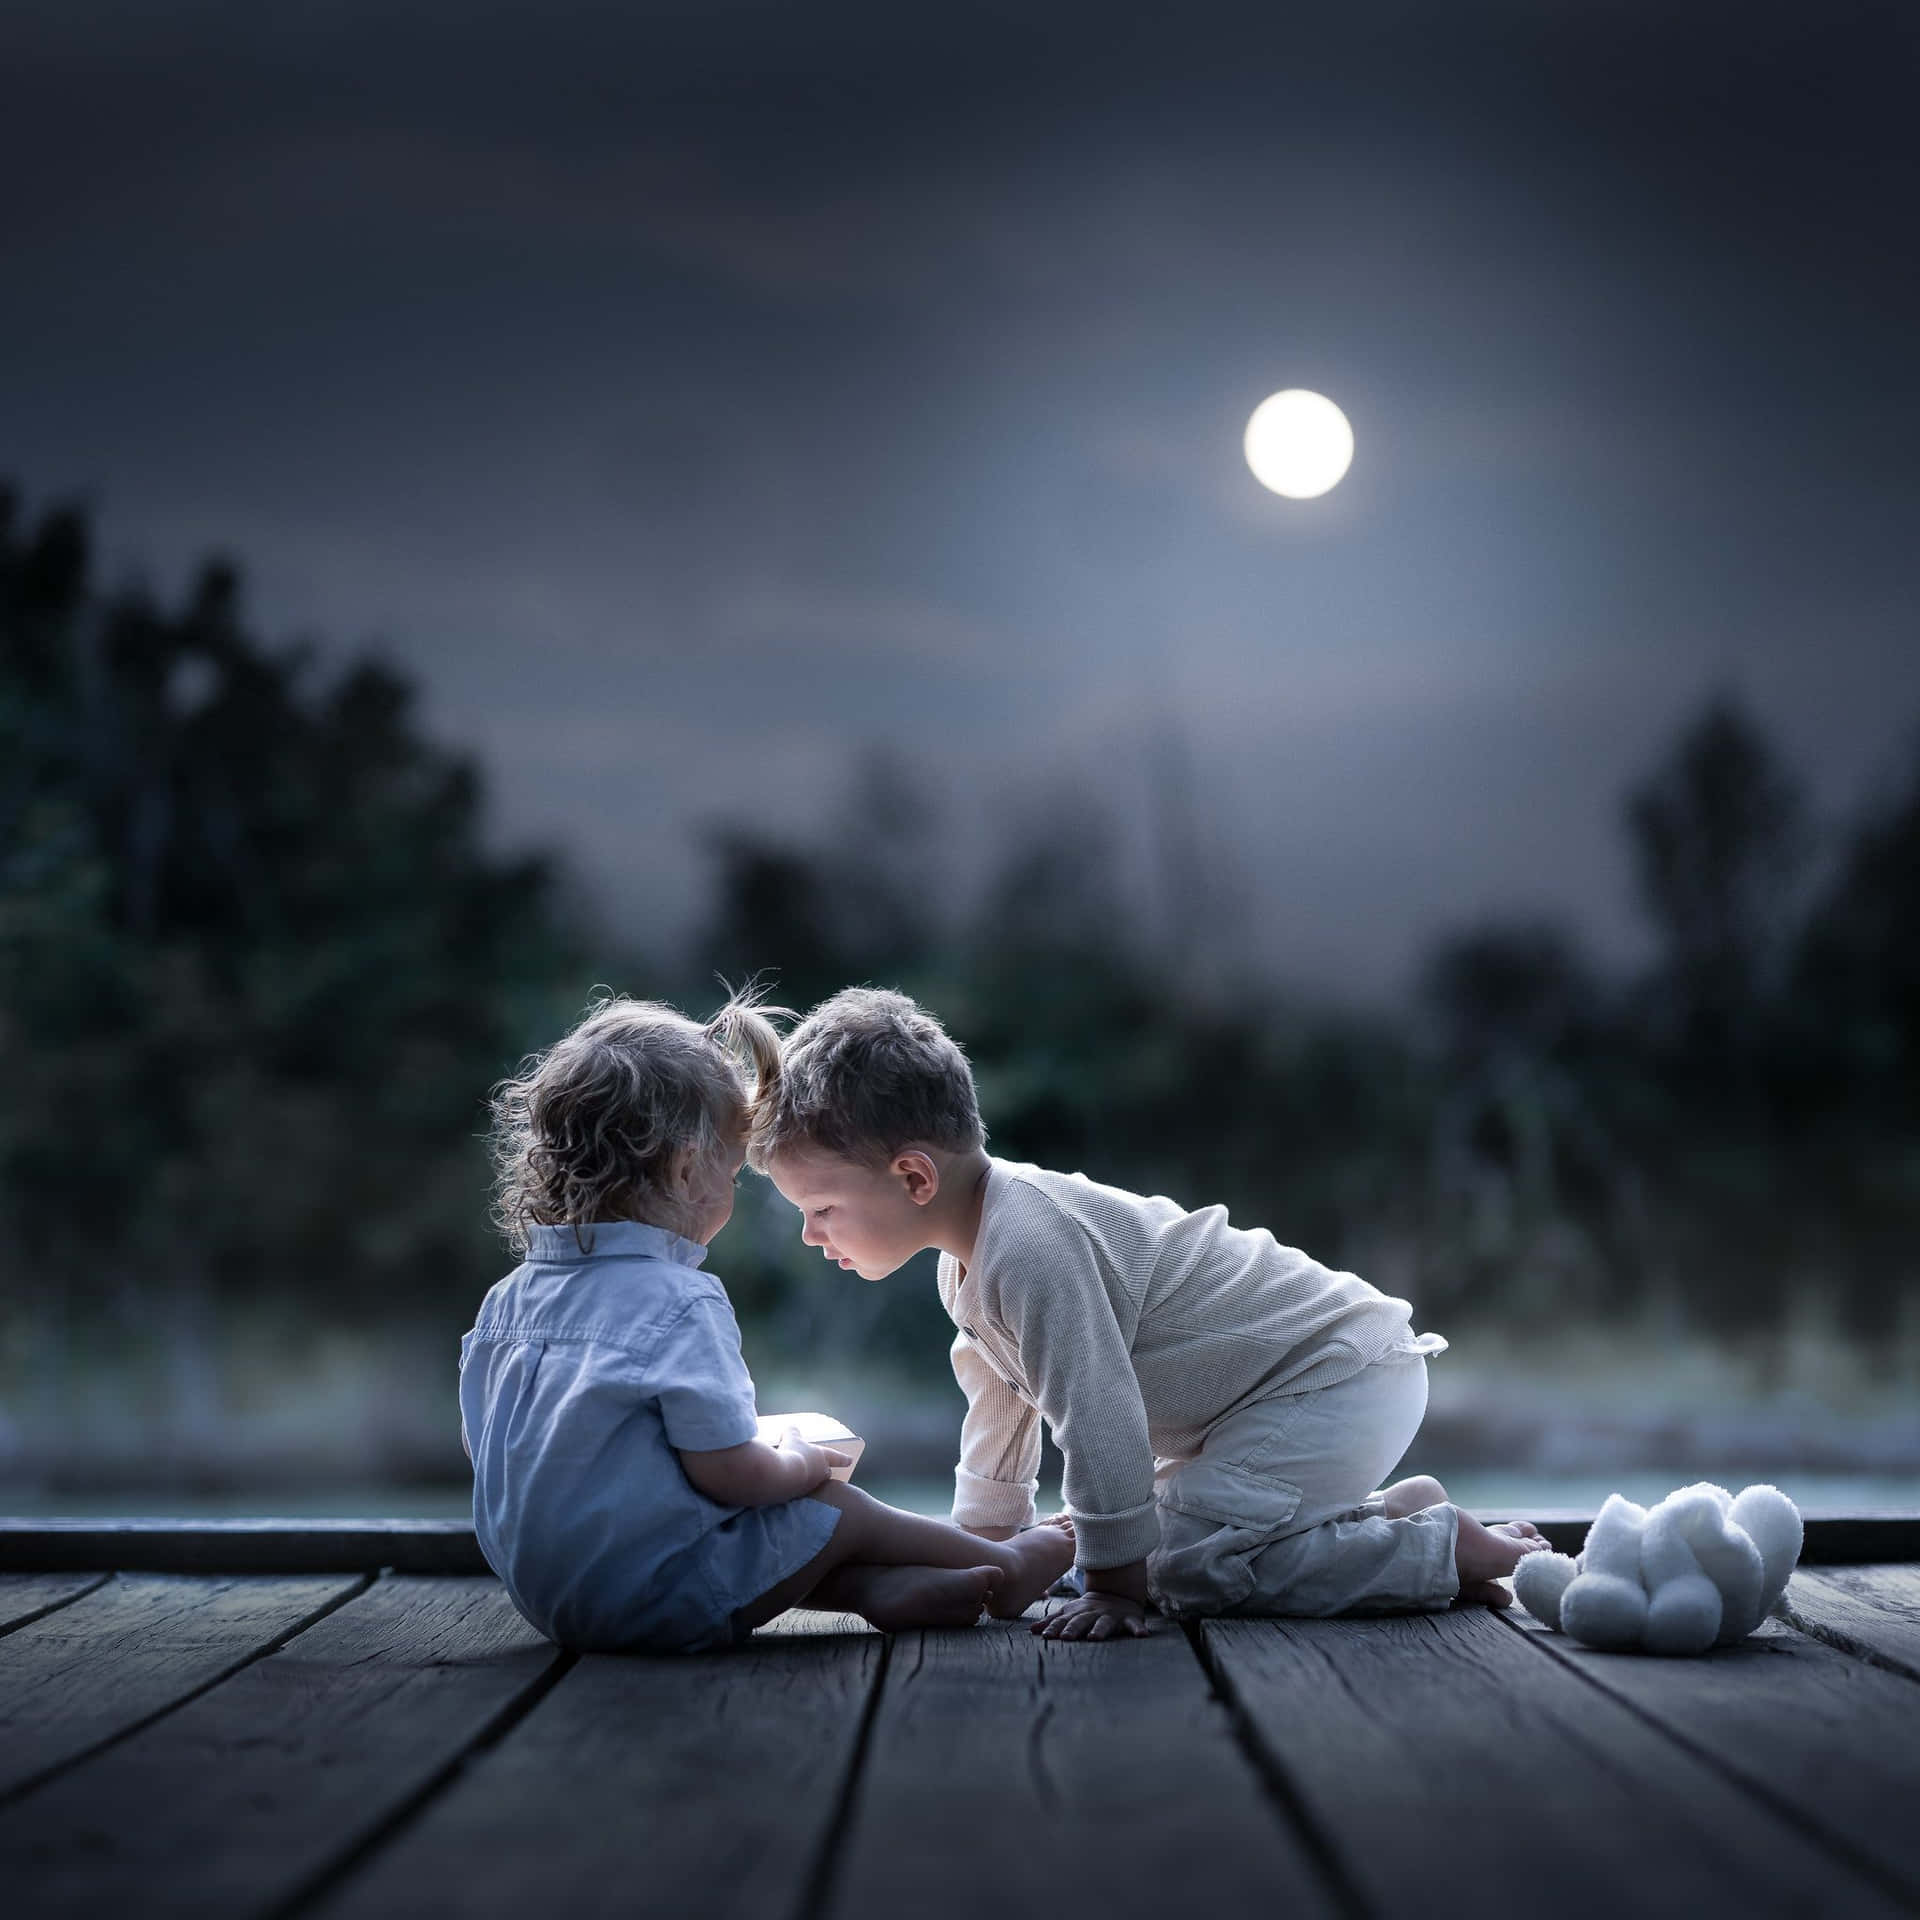 Cute Baby Couple Dating Under The Moon Wallpaper